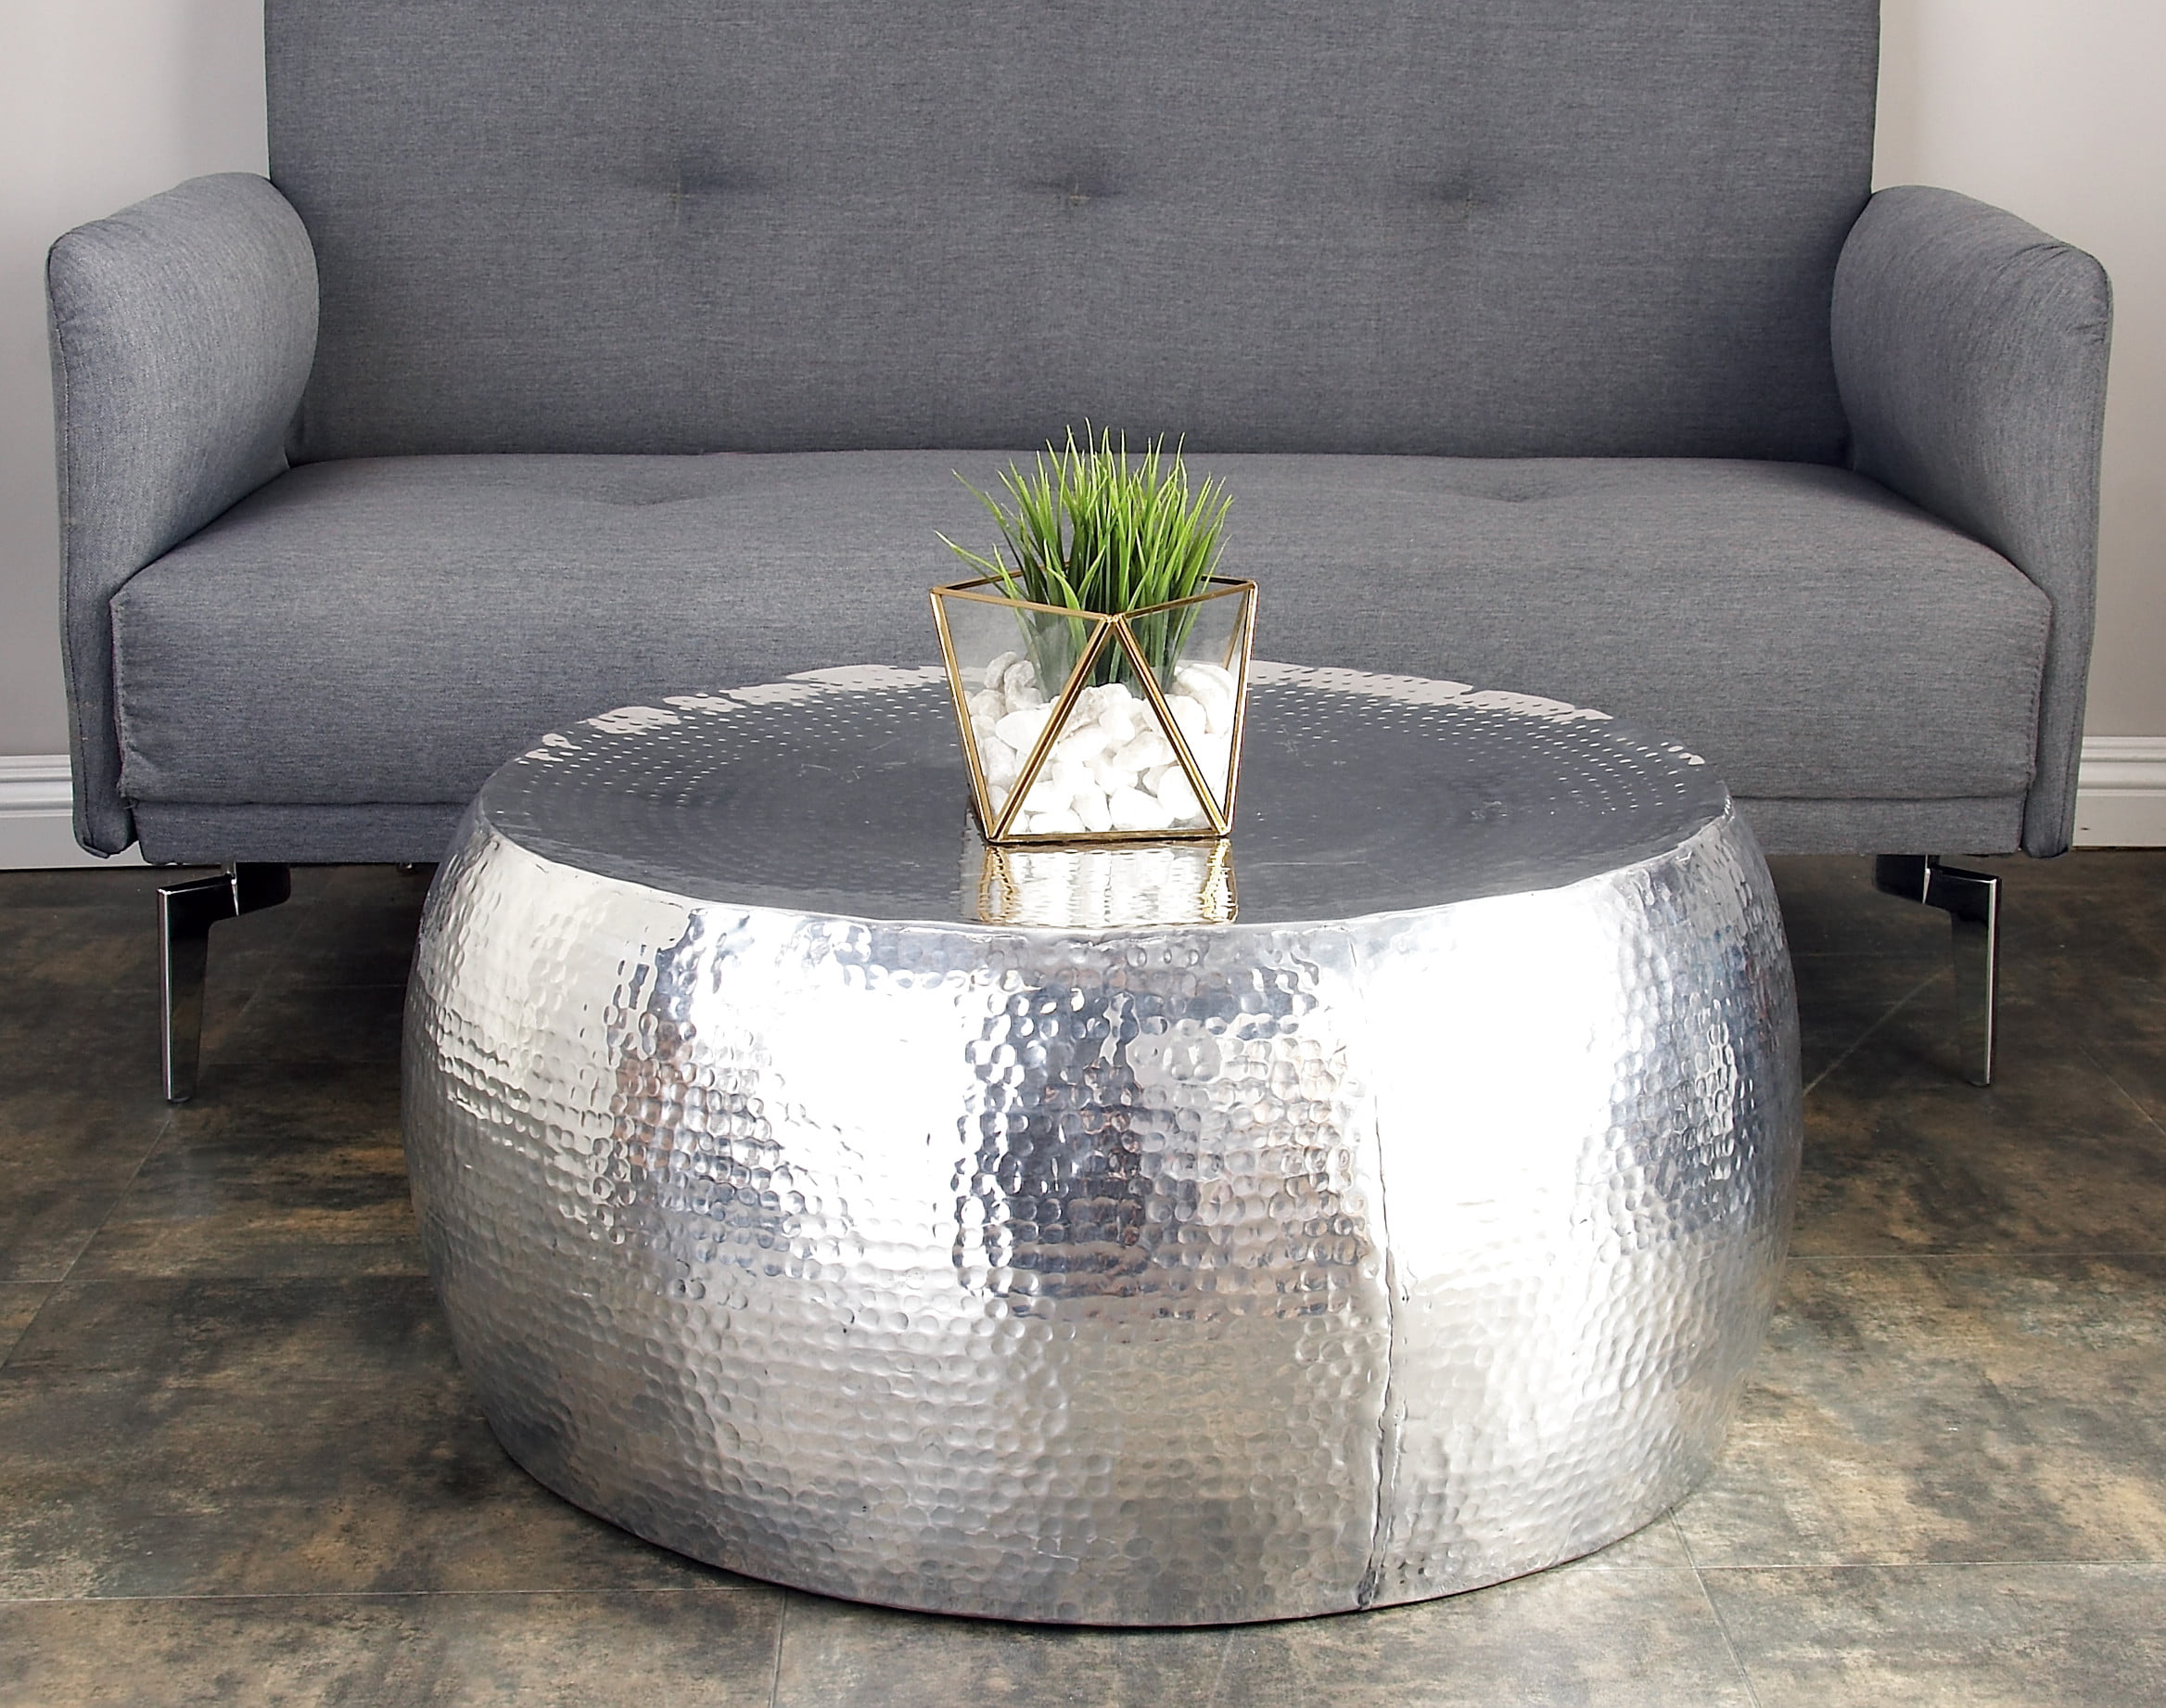 30 Inch Silver Aluminum Drum Shaped, 30 Inch Round Coffee Table With Storage